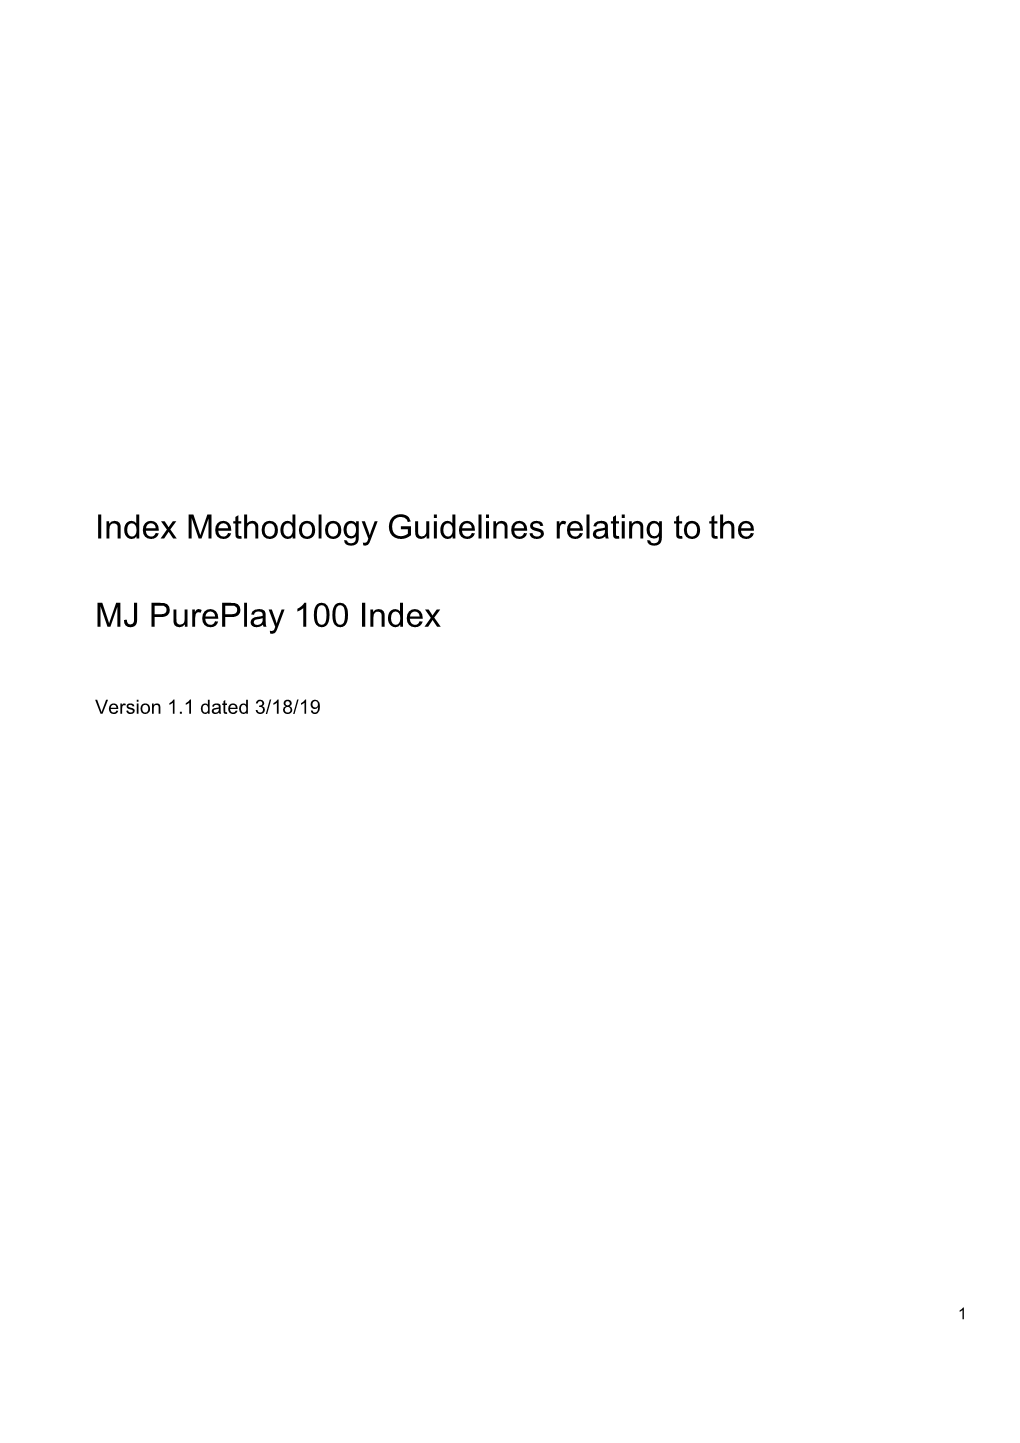 Methodology Guidelines Relating to the MJ Pureplay 100 Index